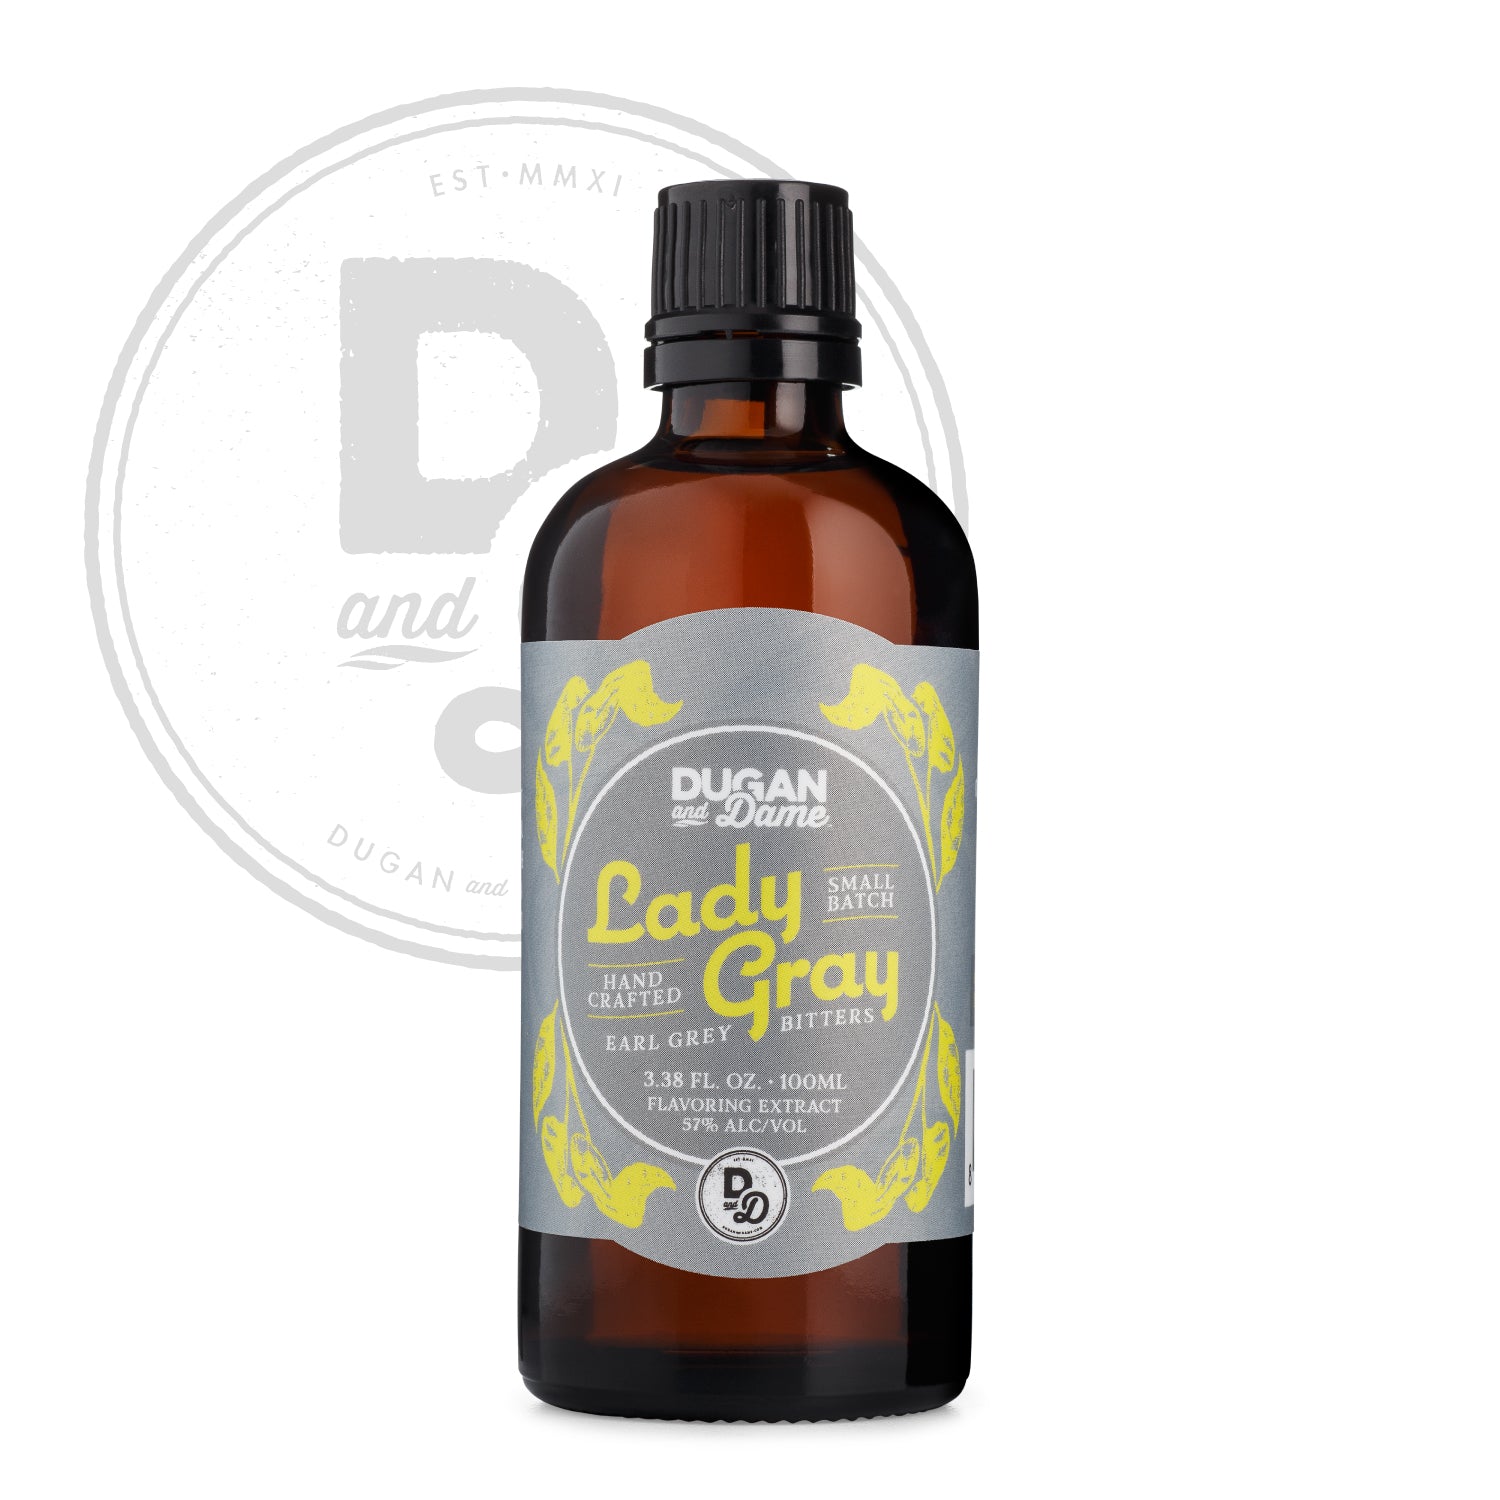 Dugan and Dame Lady Gray Cocktail Bitters